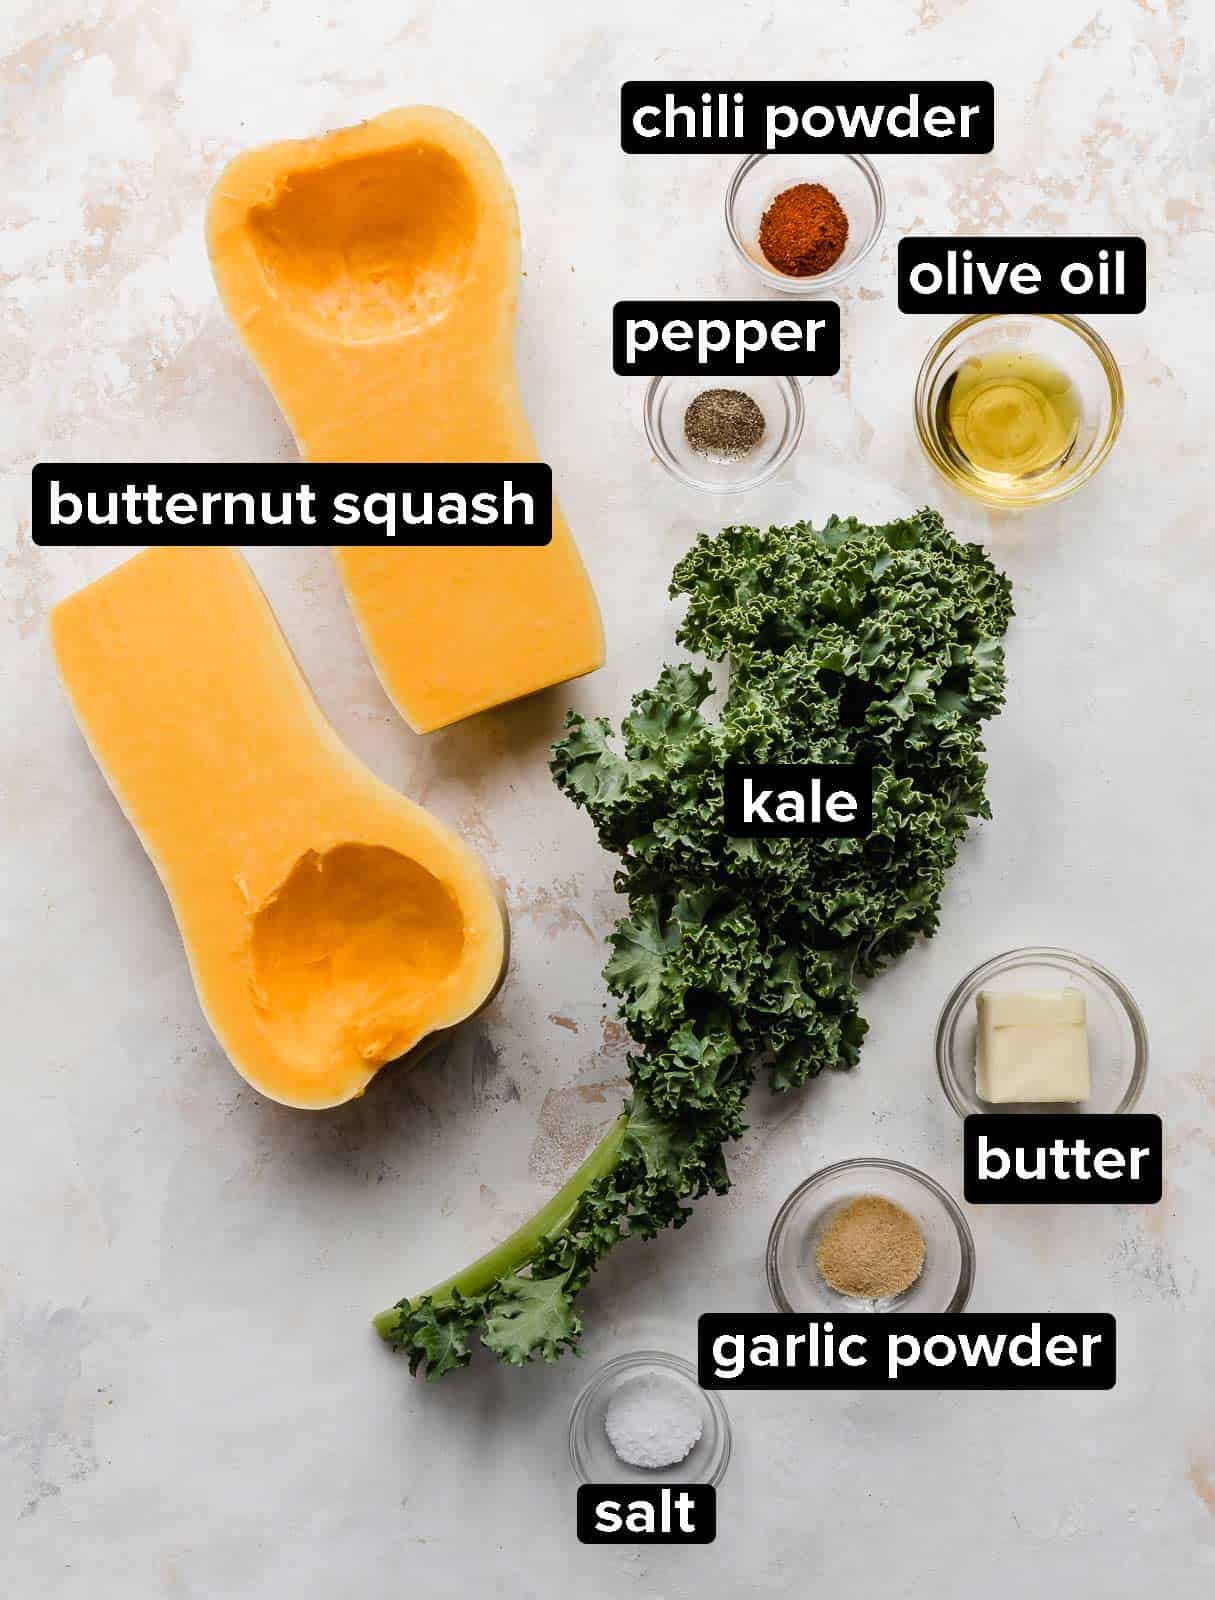 Ingredients used to make a butternut squash and kale dish, on a white textured background.